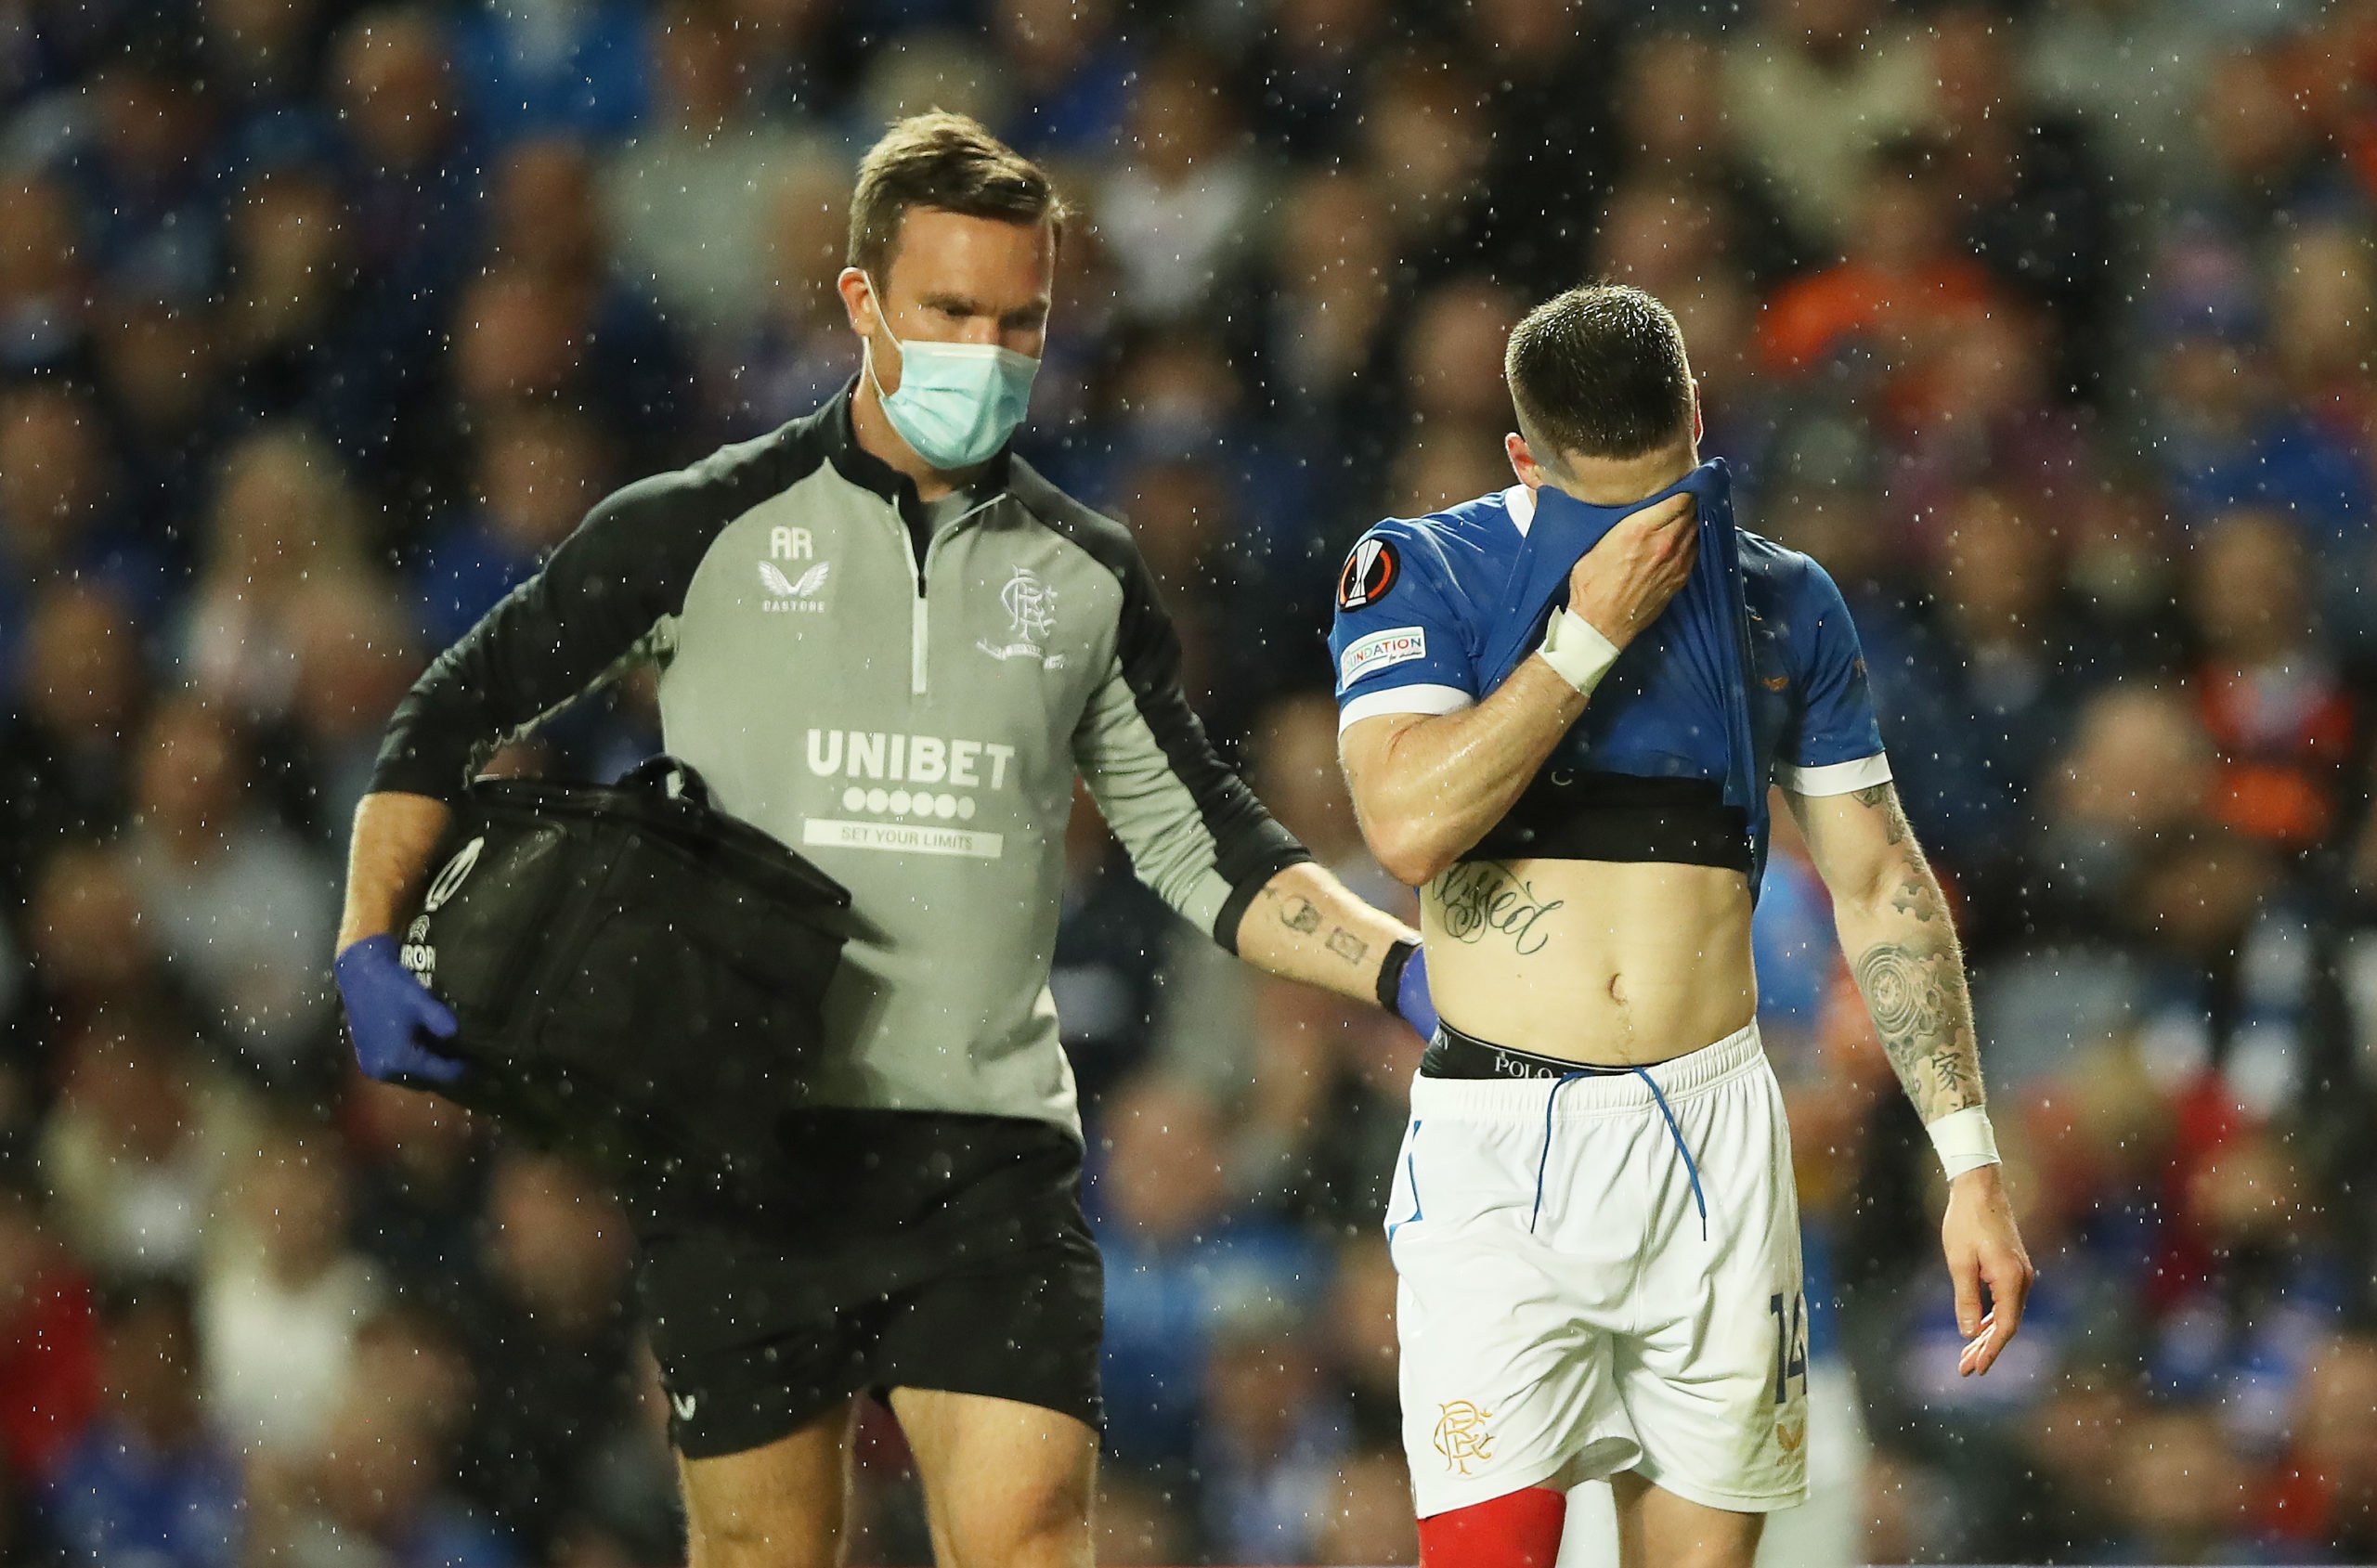 Rangers winger Ryan Kent leaving the pitch with an injury